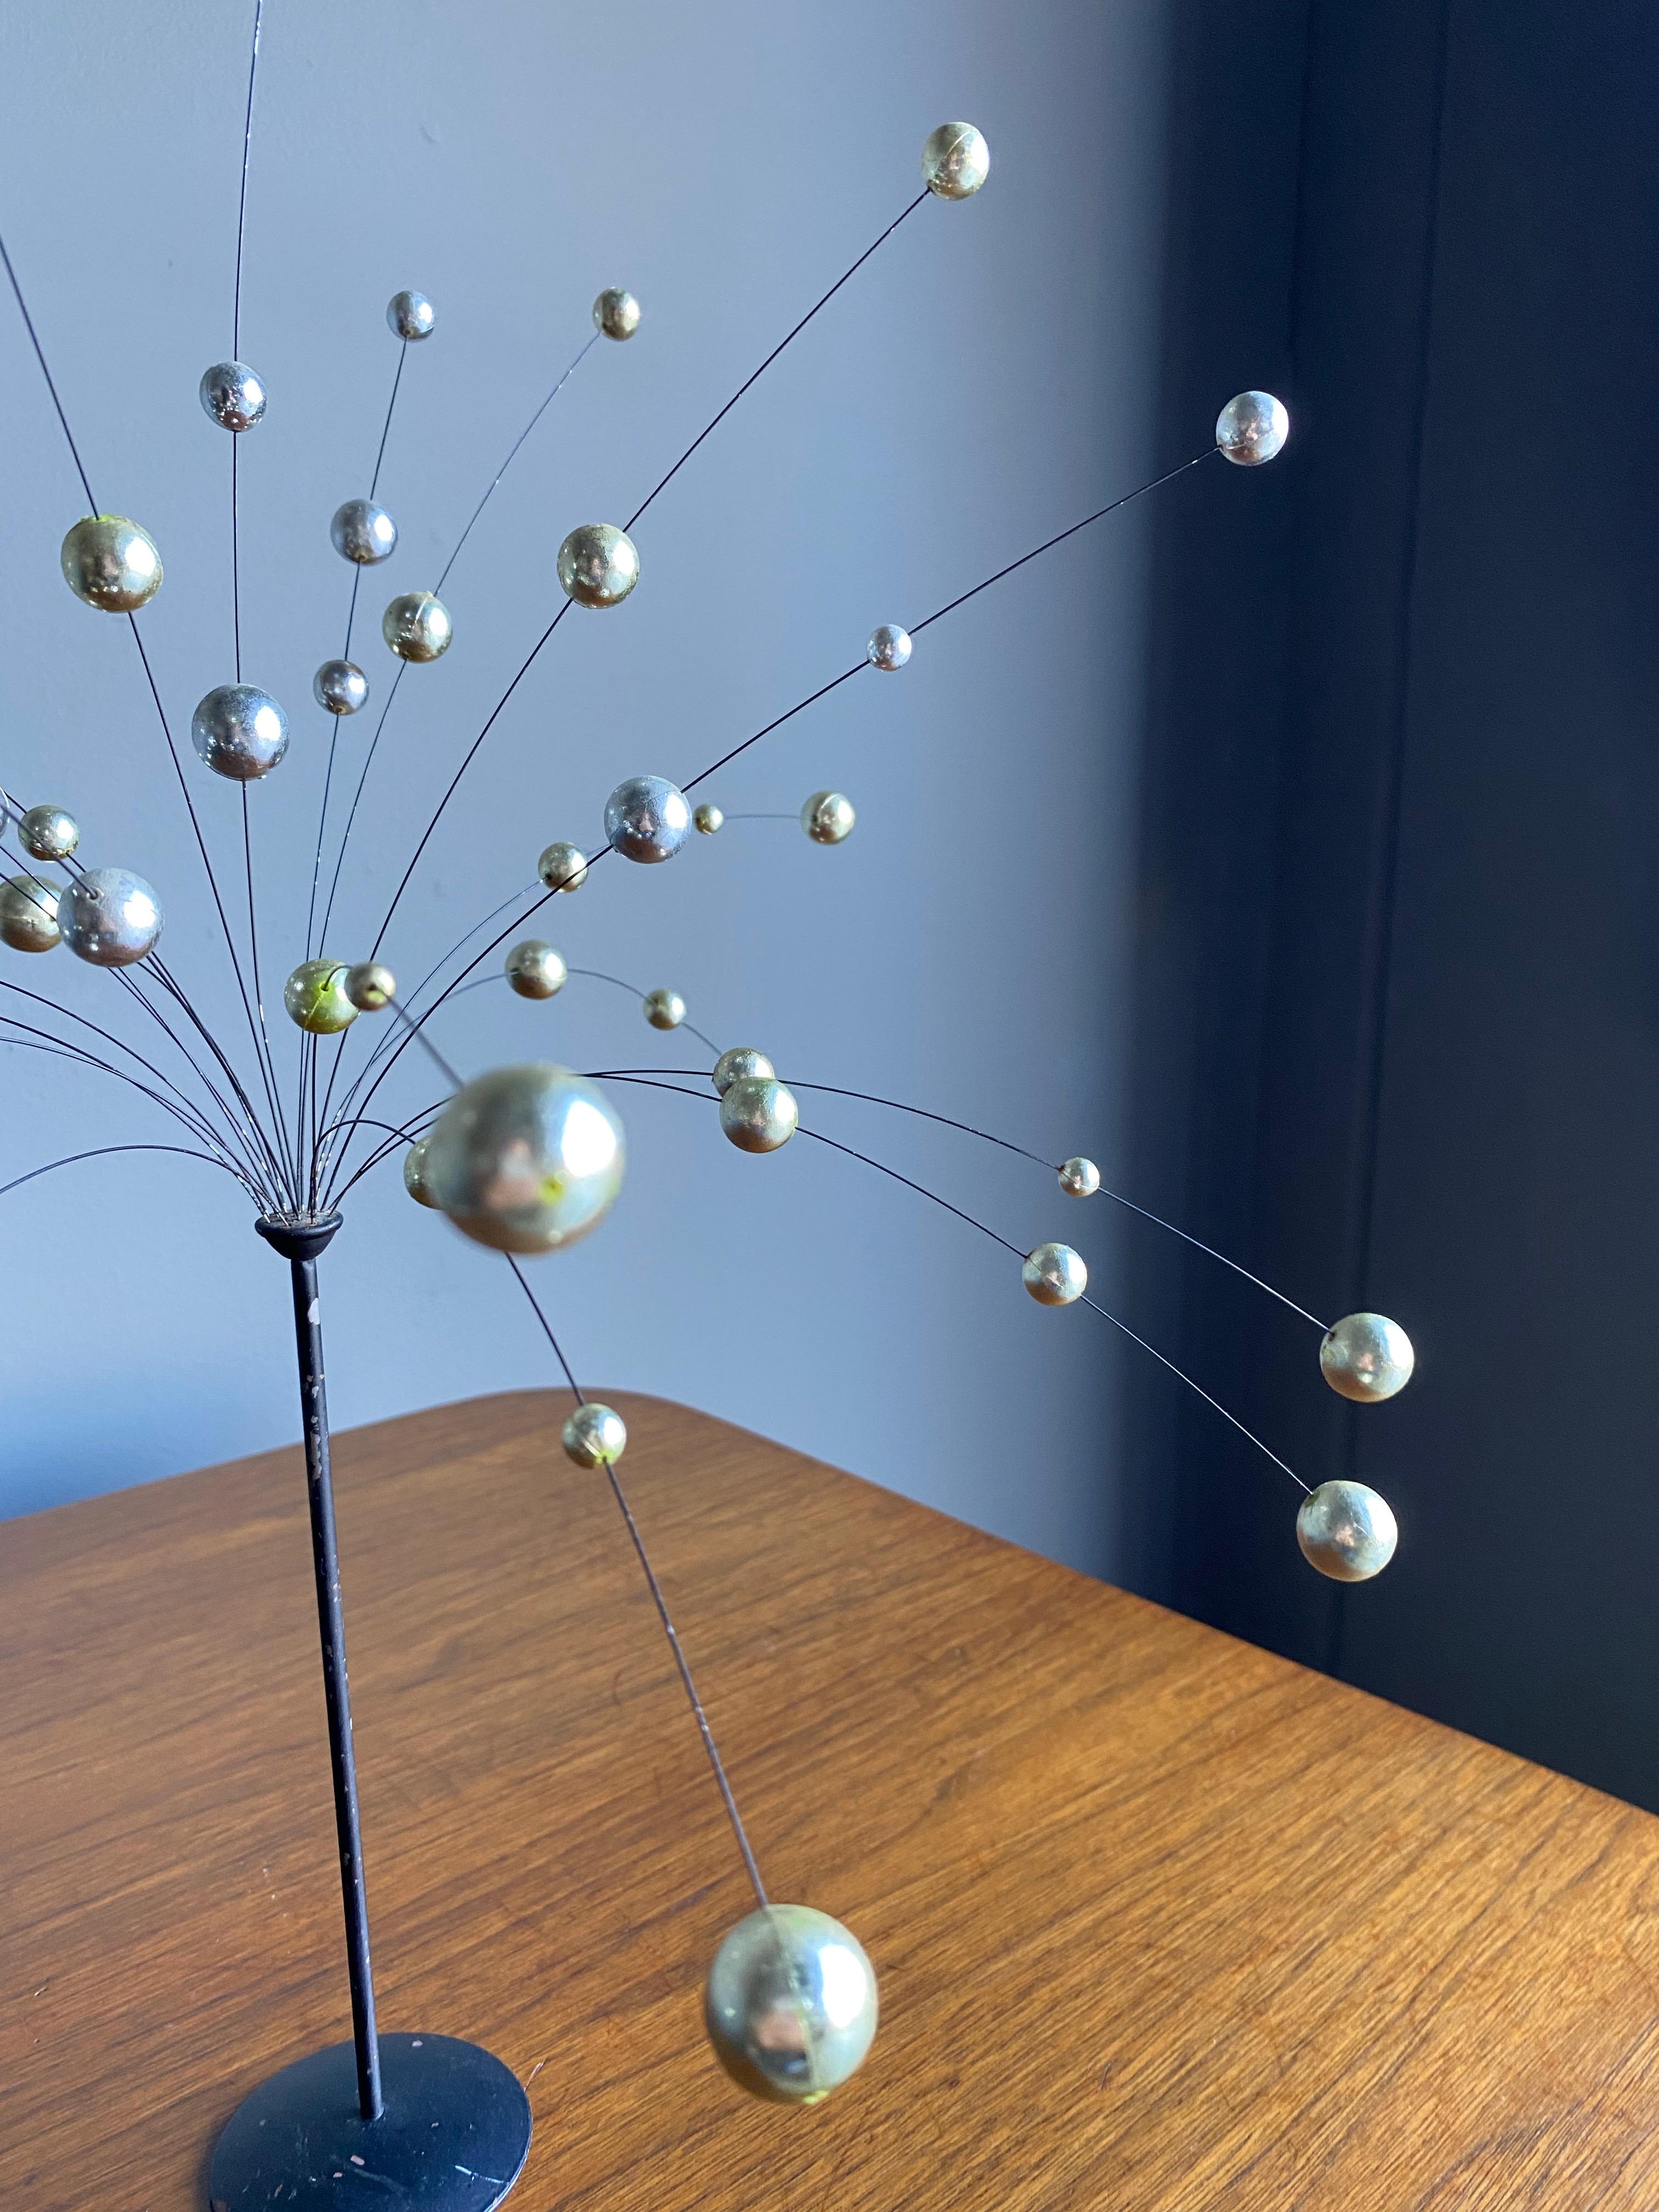 Vintage Kinetic Sculpture by Laurids Lonborg In Good Condition For Sale In Costa Mesa, CA